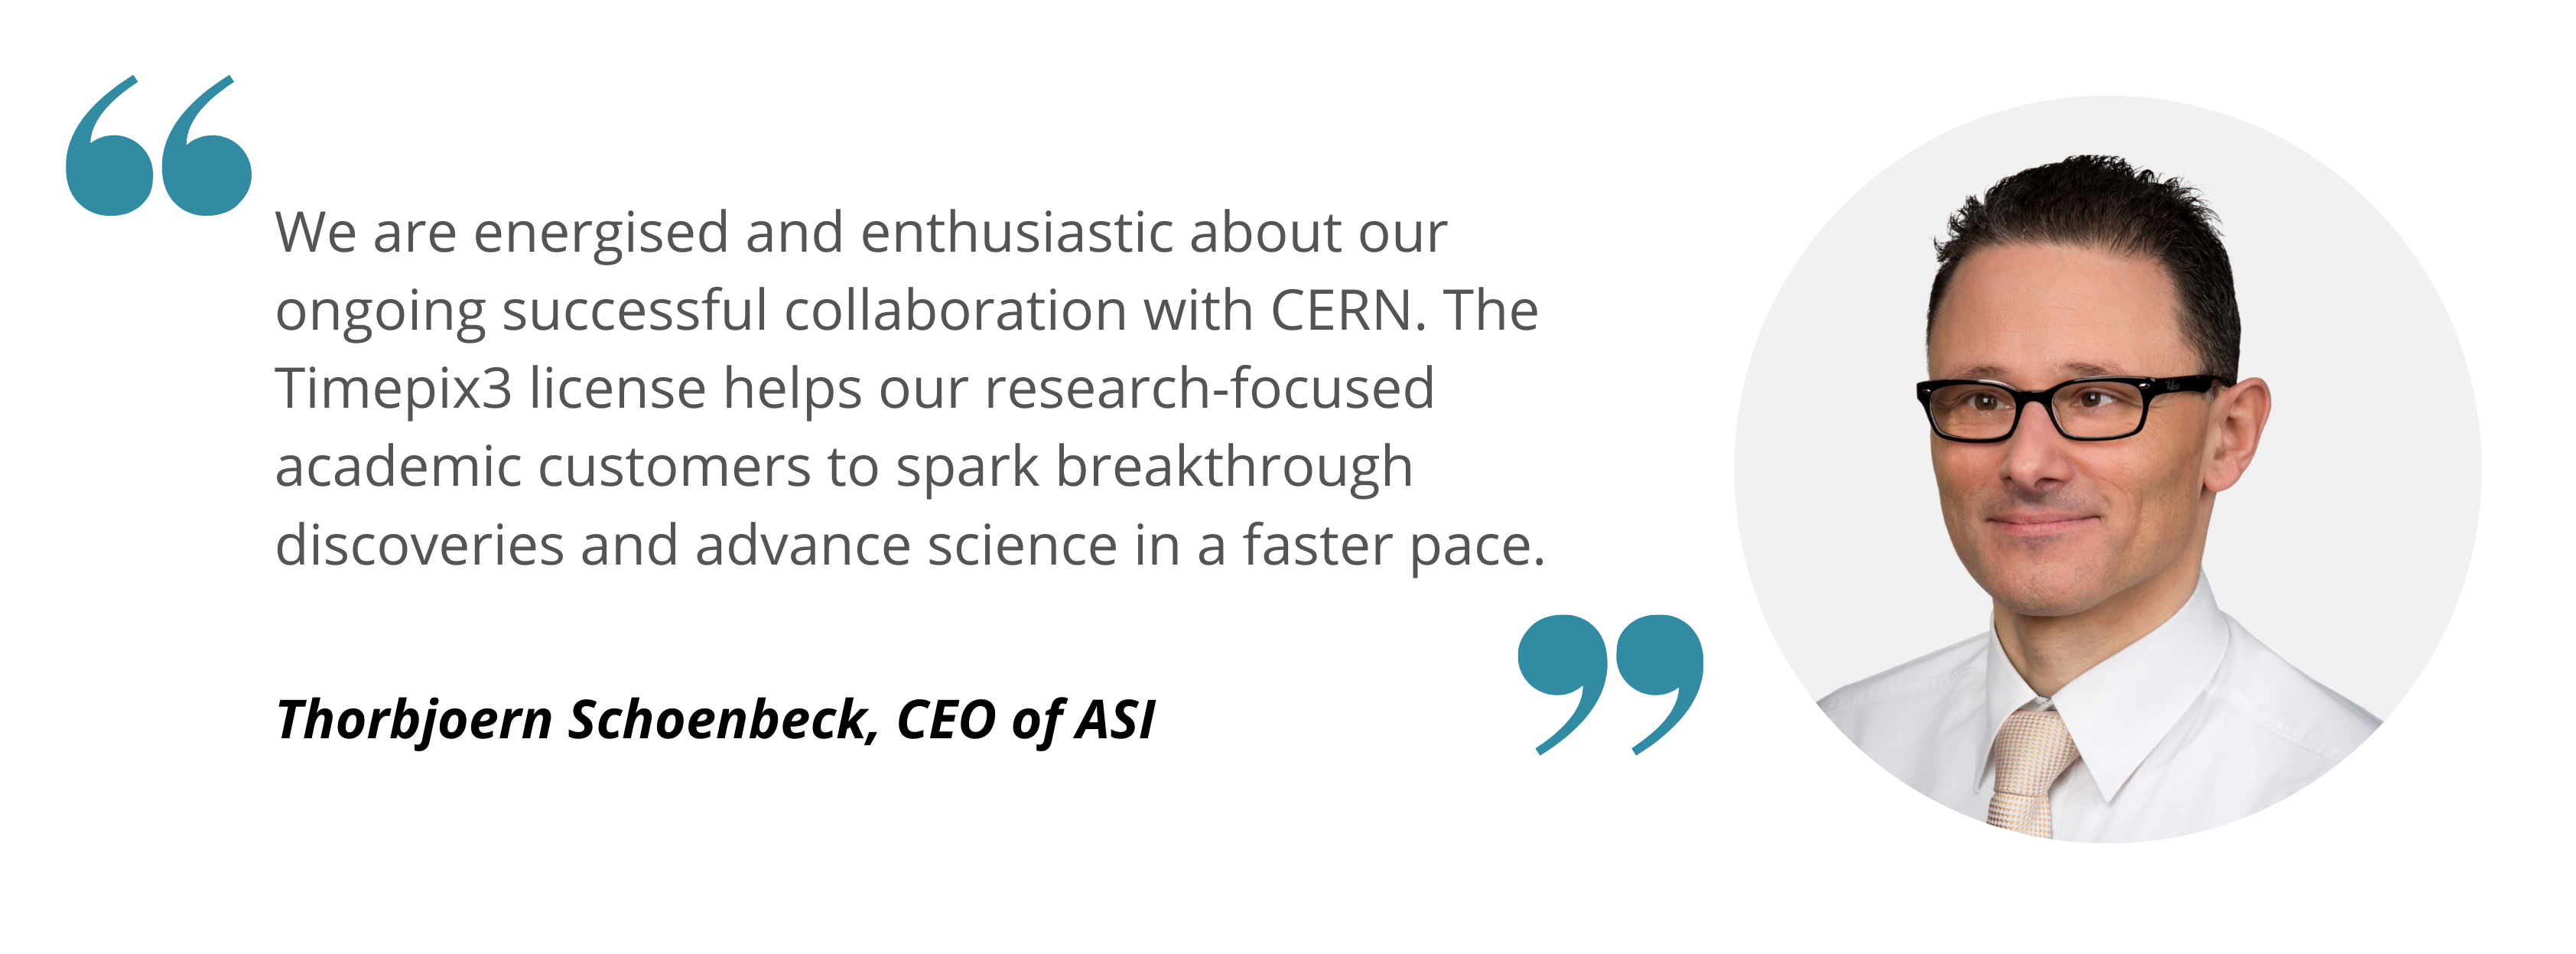 Thorbjoern We are energised and enthusiastic about our ongoing successful collaboration with CERN. The Timepix3 license helps our research-focused academic customers to spark breakthrough discoveries and advance science in a faster pace.